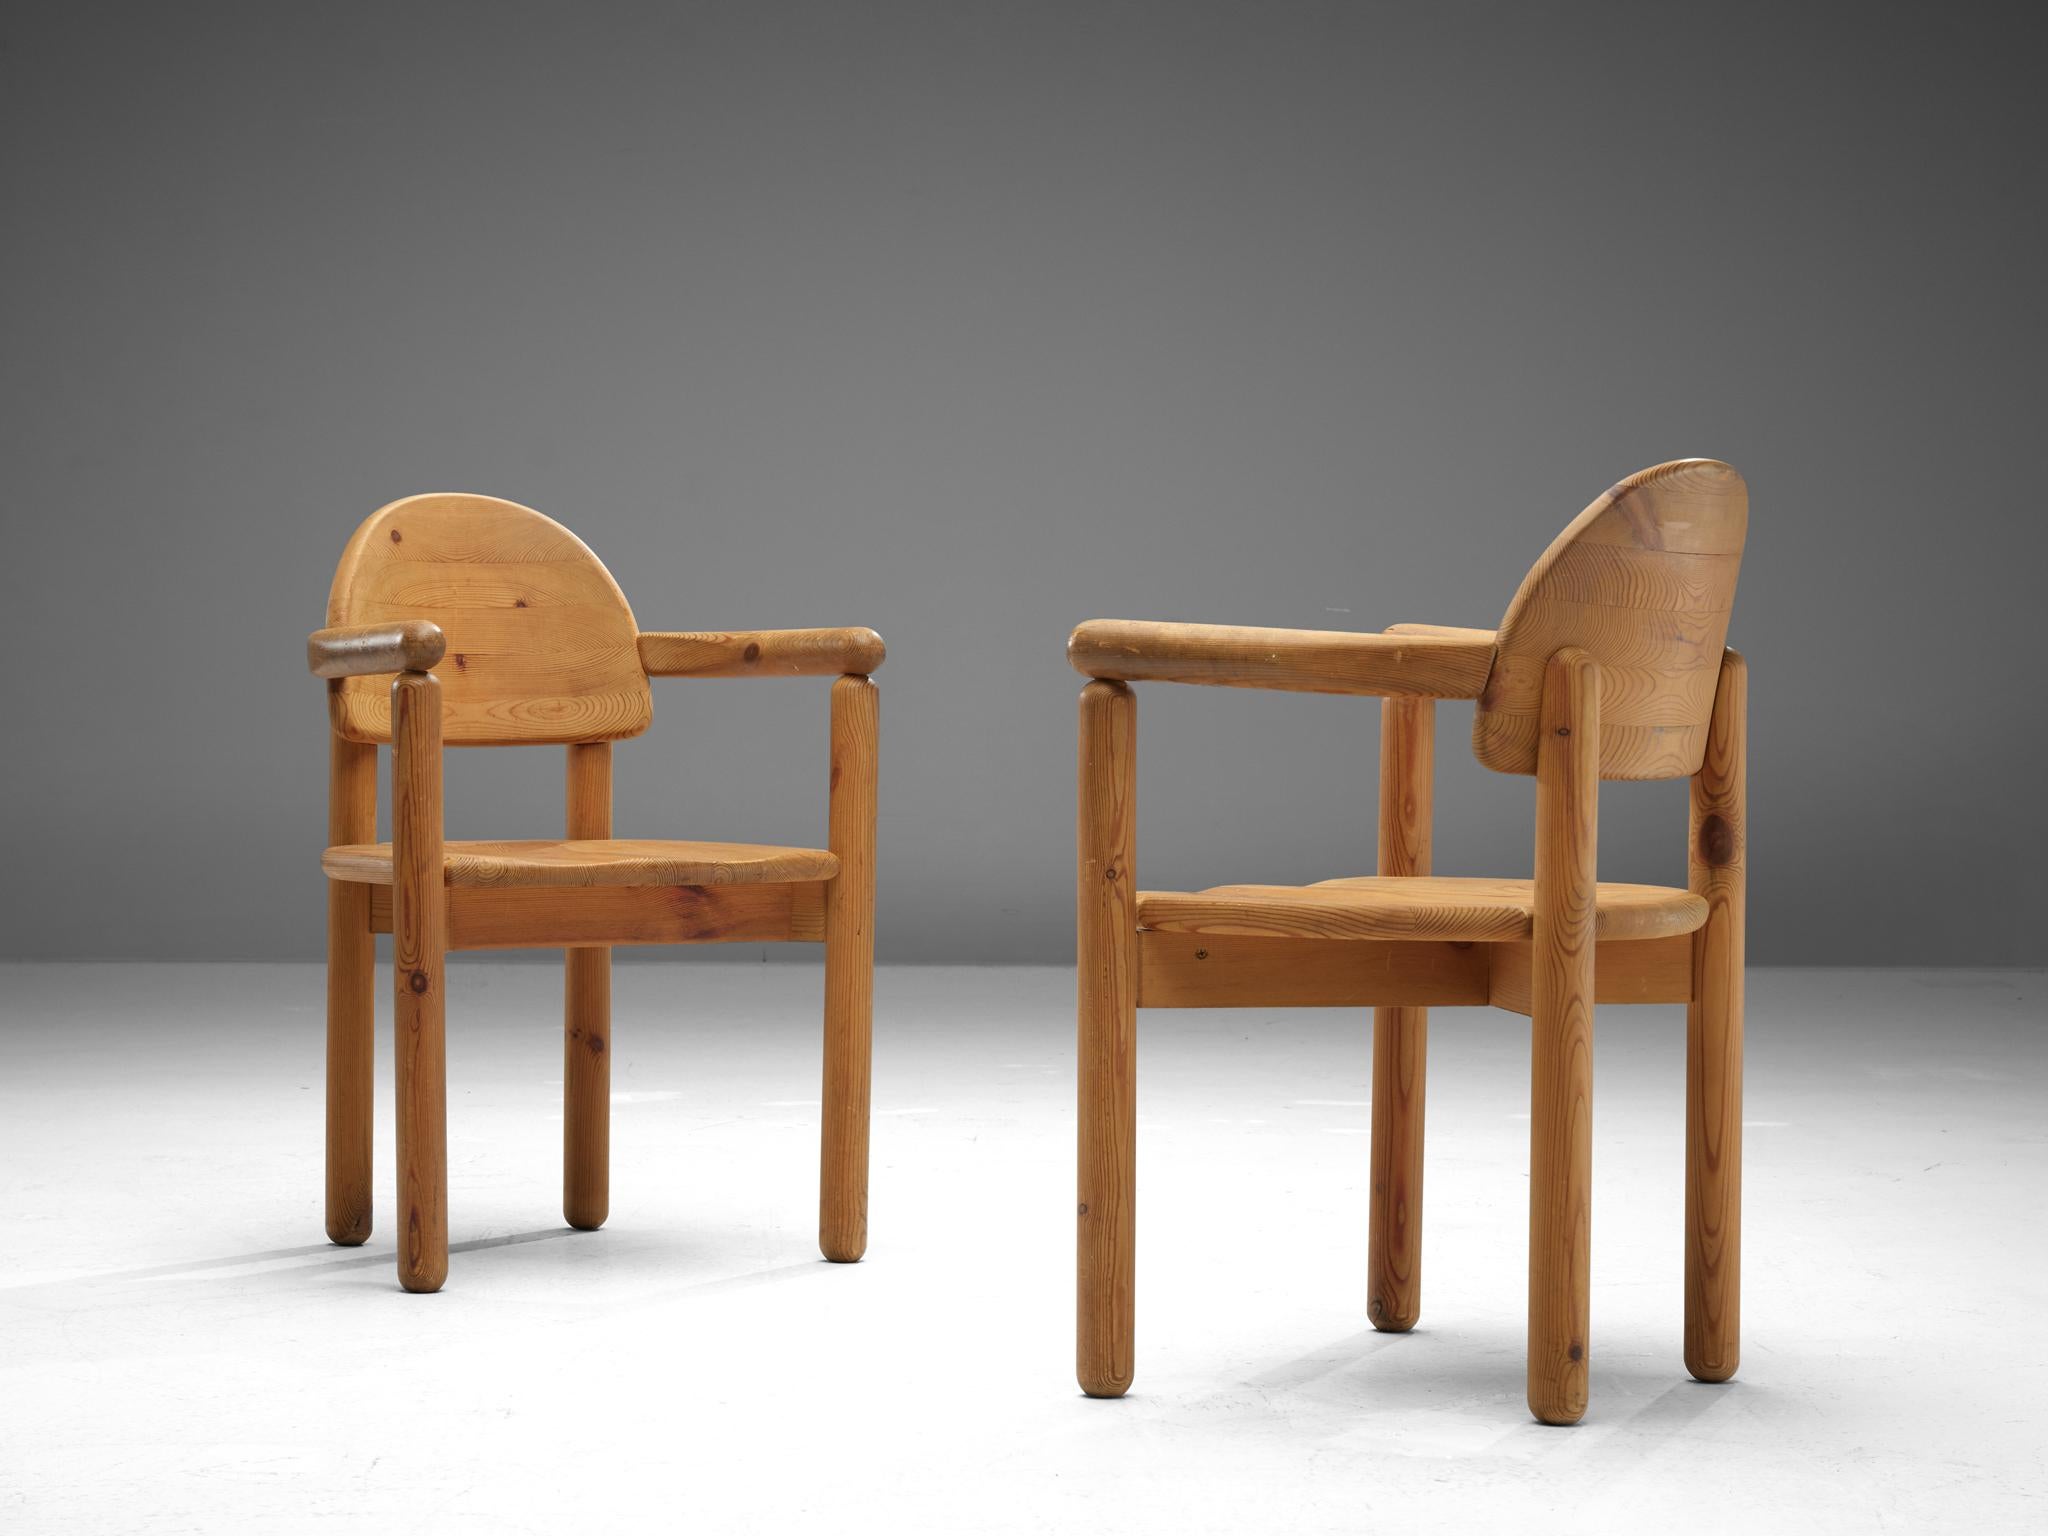 Rainer Daumiller for Hirtshals Savvaerk, armchairs, pine, Denmark, 1970s.

Beautiful set of organic and natural armchairs in solid pine. A simplistic design with a round seating and attention for the natural expression and grain of the wood. These